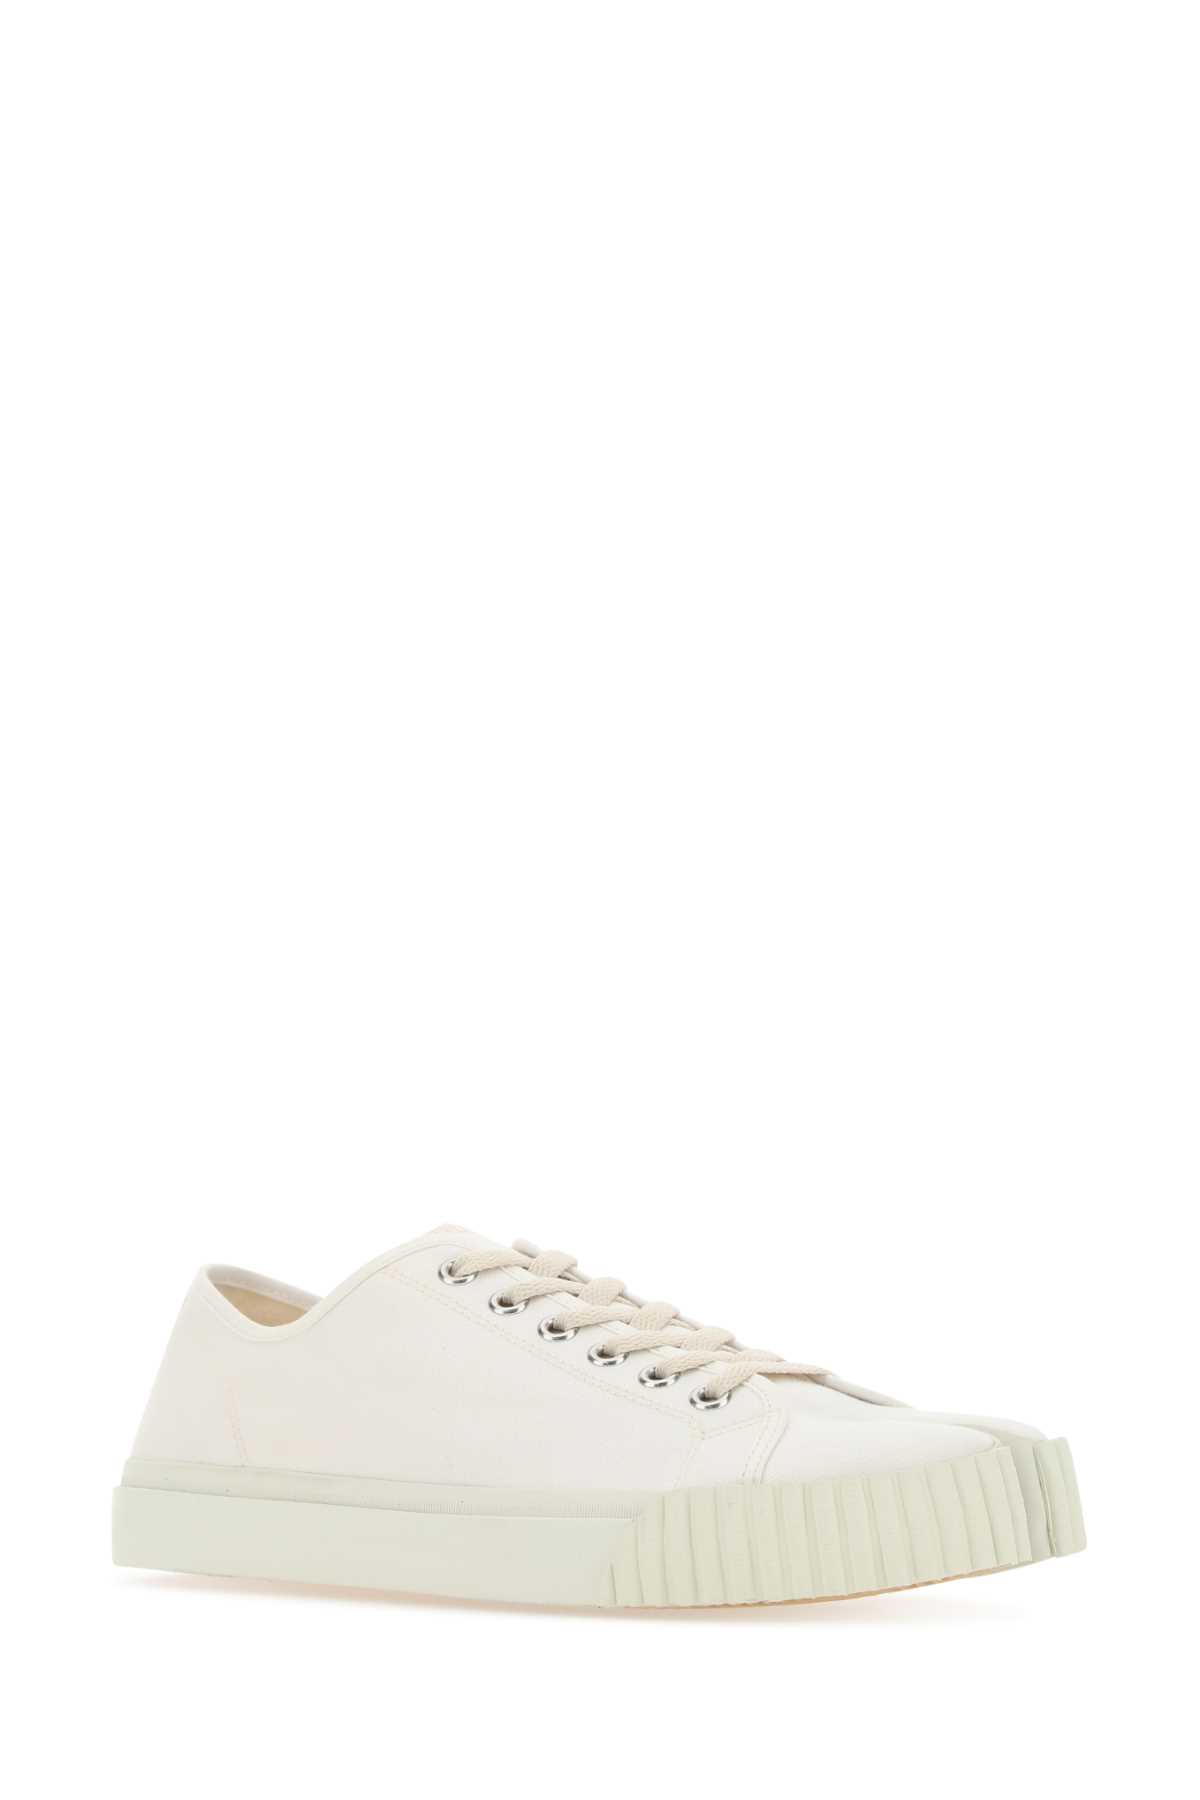 Maison Margiela Ivory Canvas Tabi Trainers In T1003